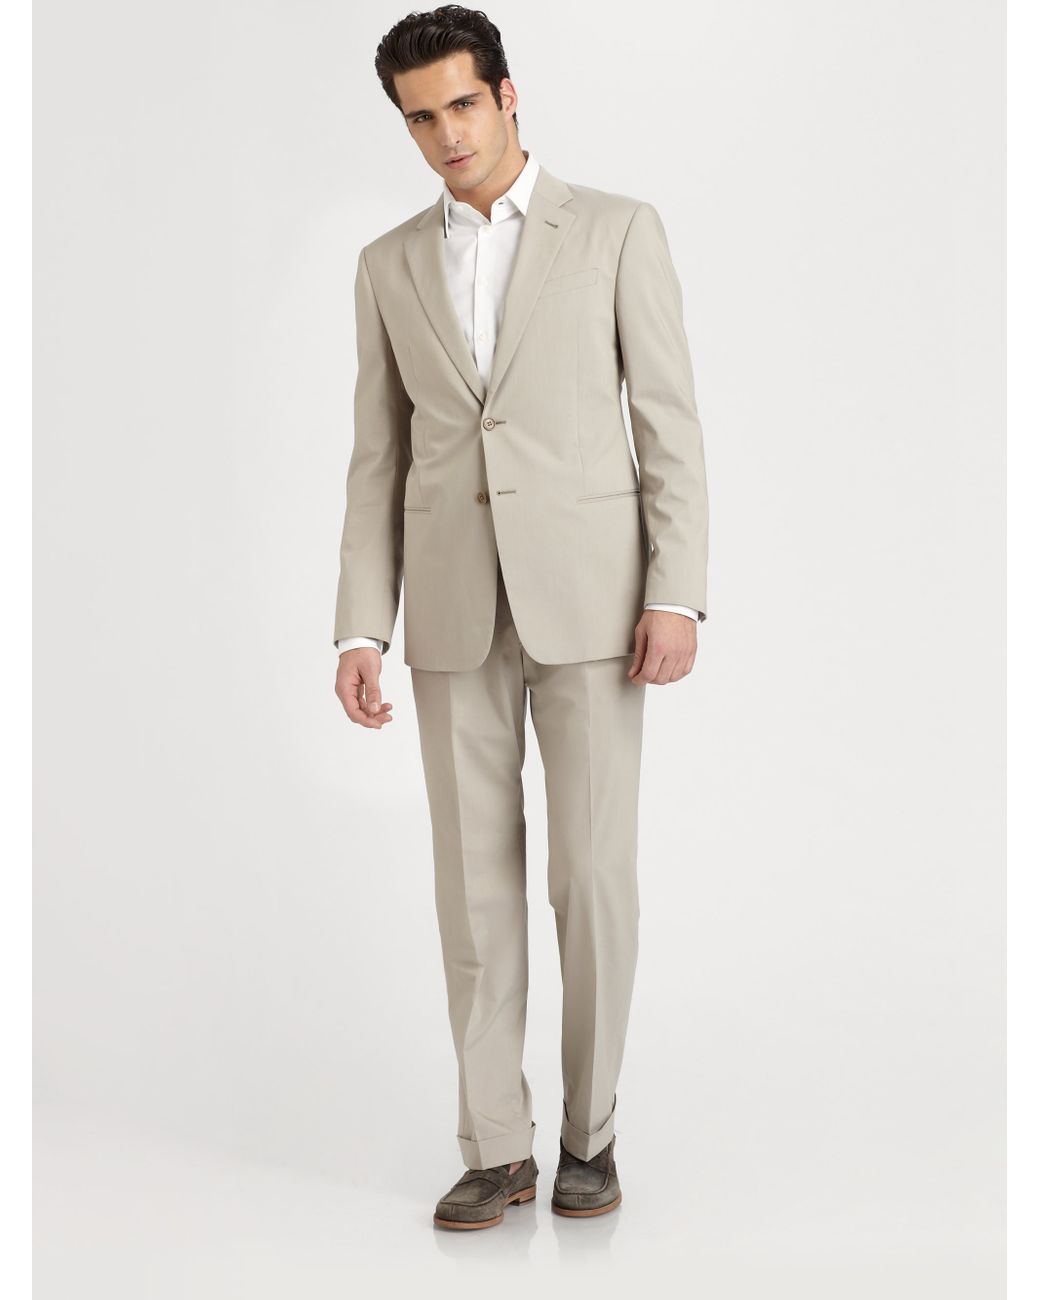 cascade zuiverheid Minachting Armani Cotton Summer Suit in Natural for Men | Lyst